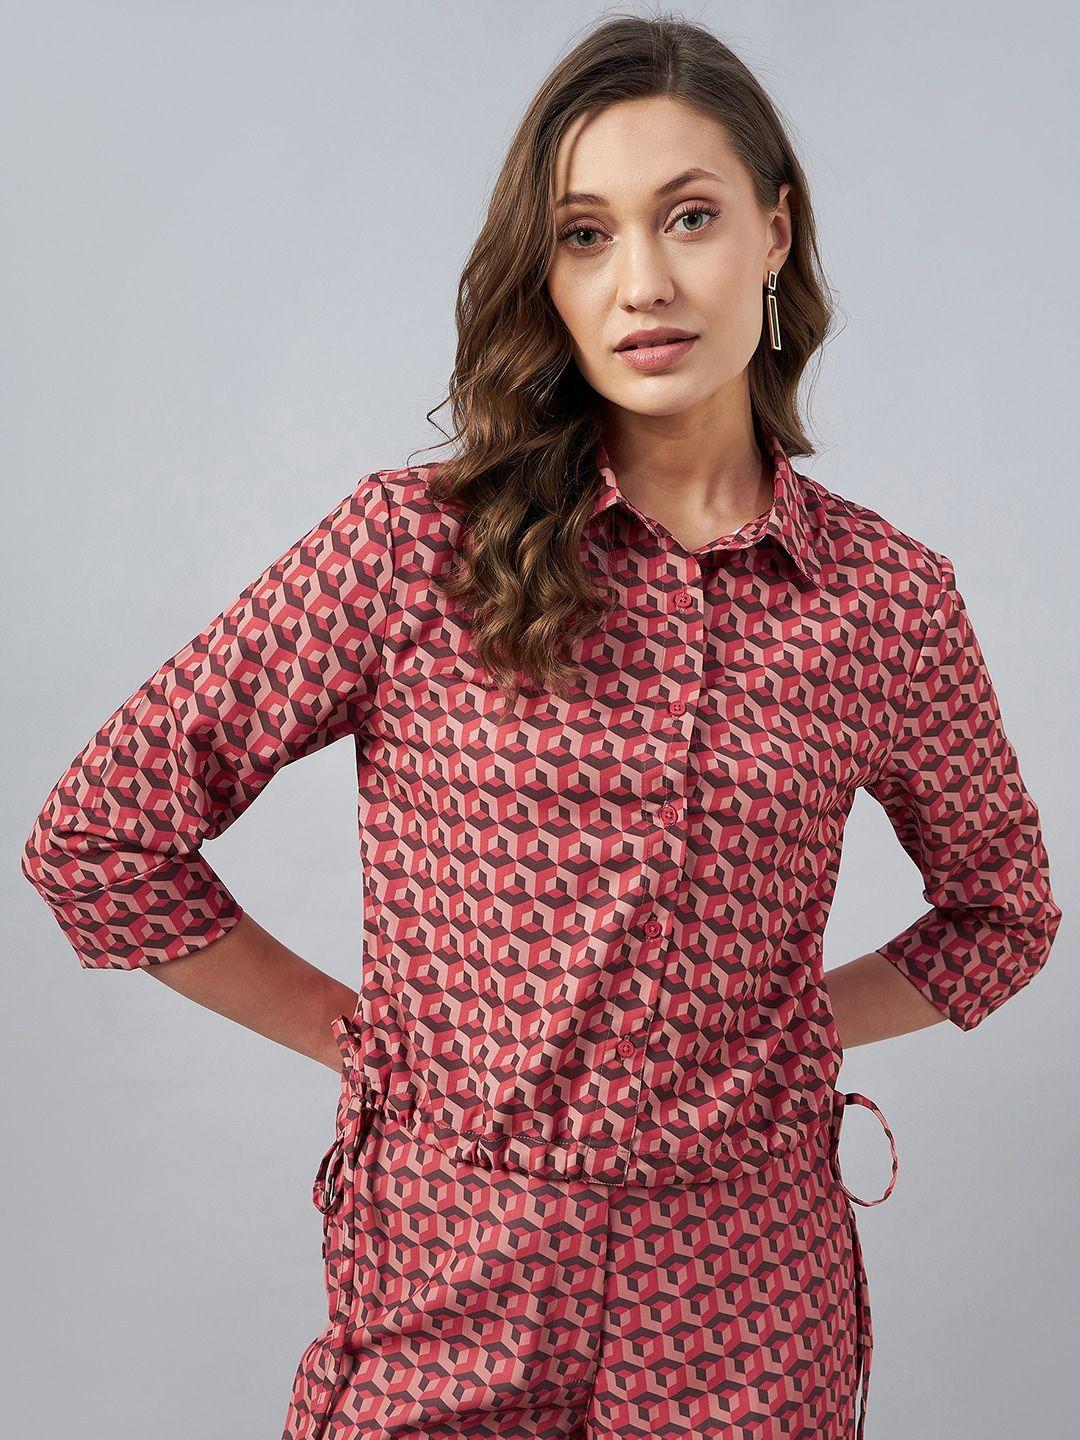 marie-claire-print-georgette-shirt-style-top